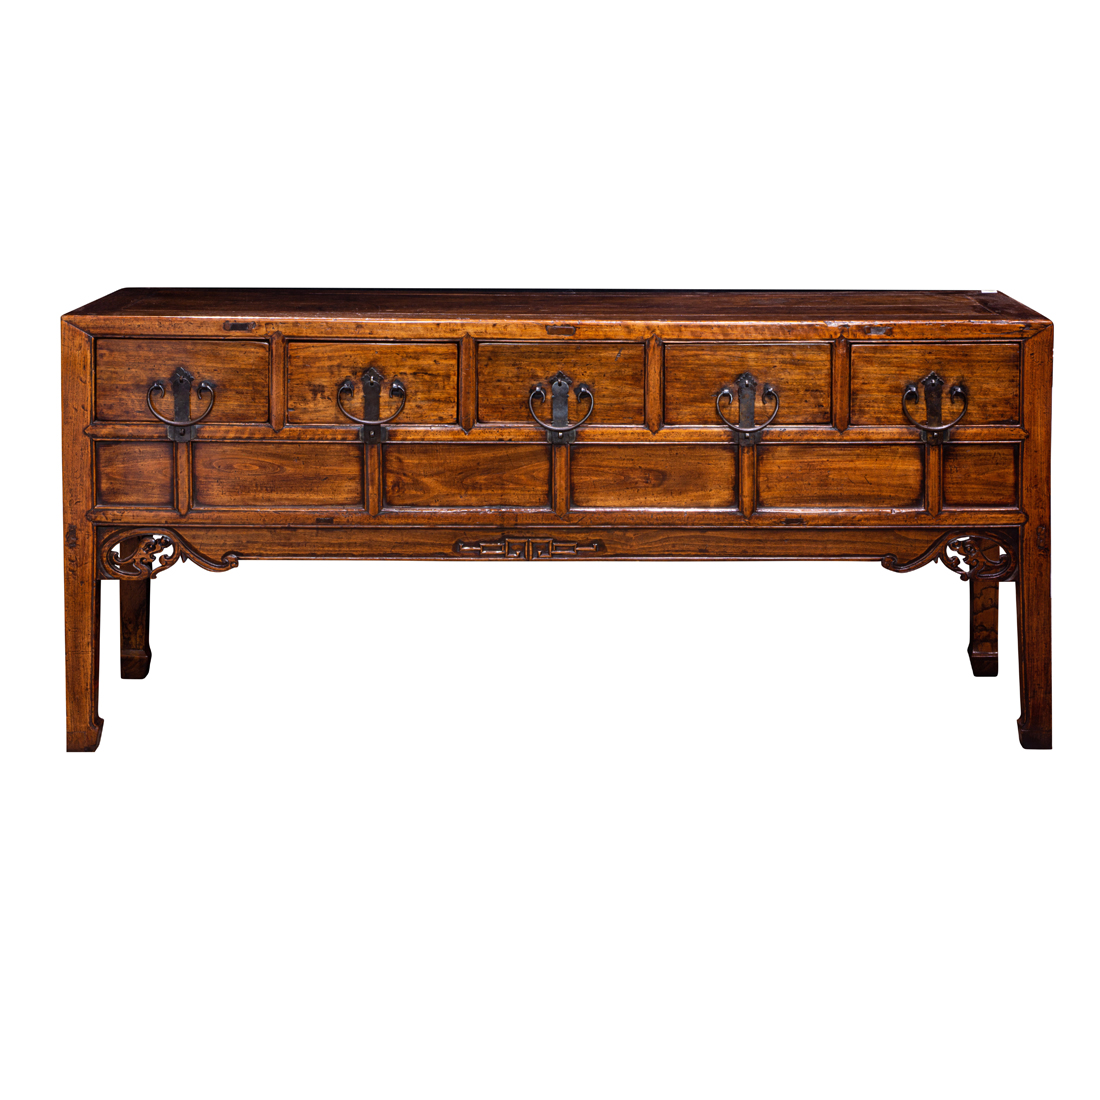 CHINESE ELM ALTAR STYLE SIDEBOARD  2d1897